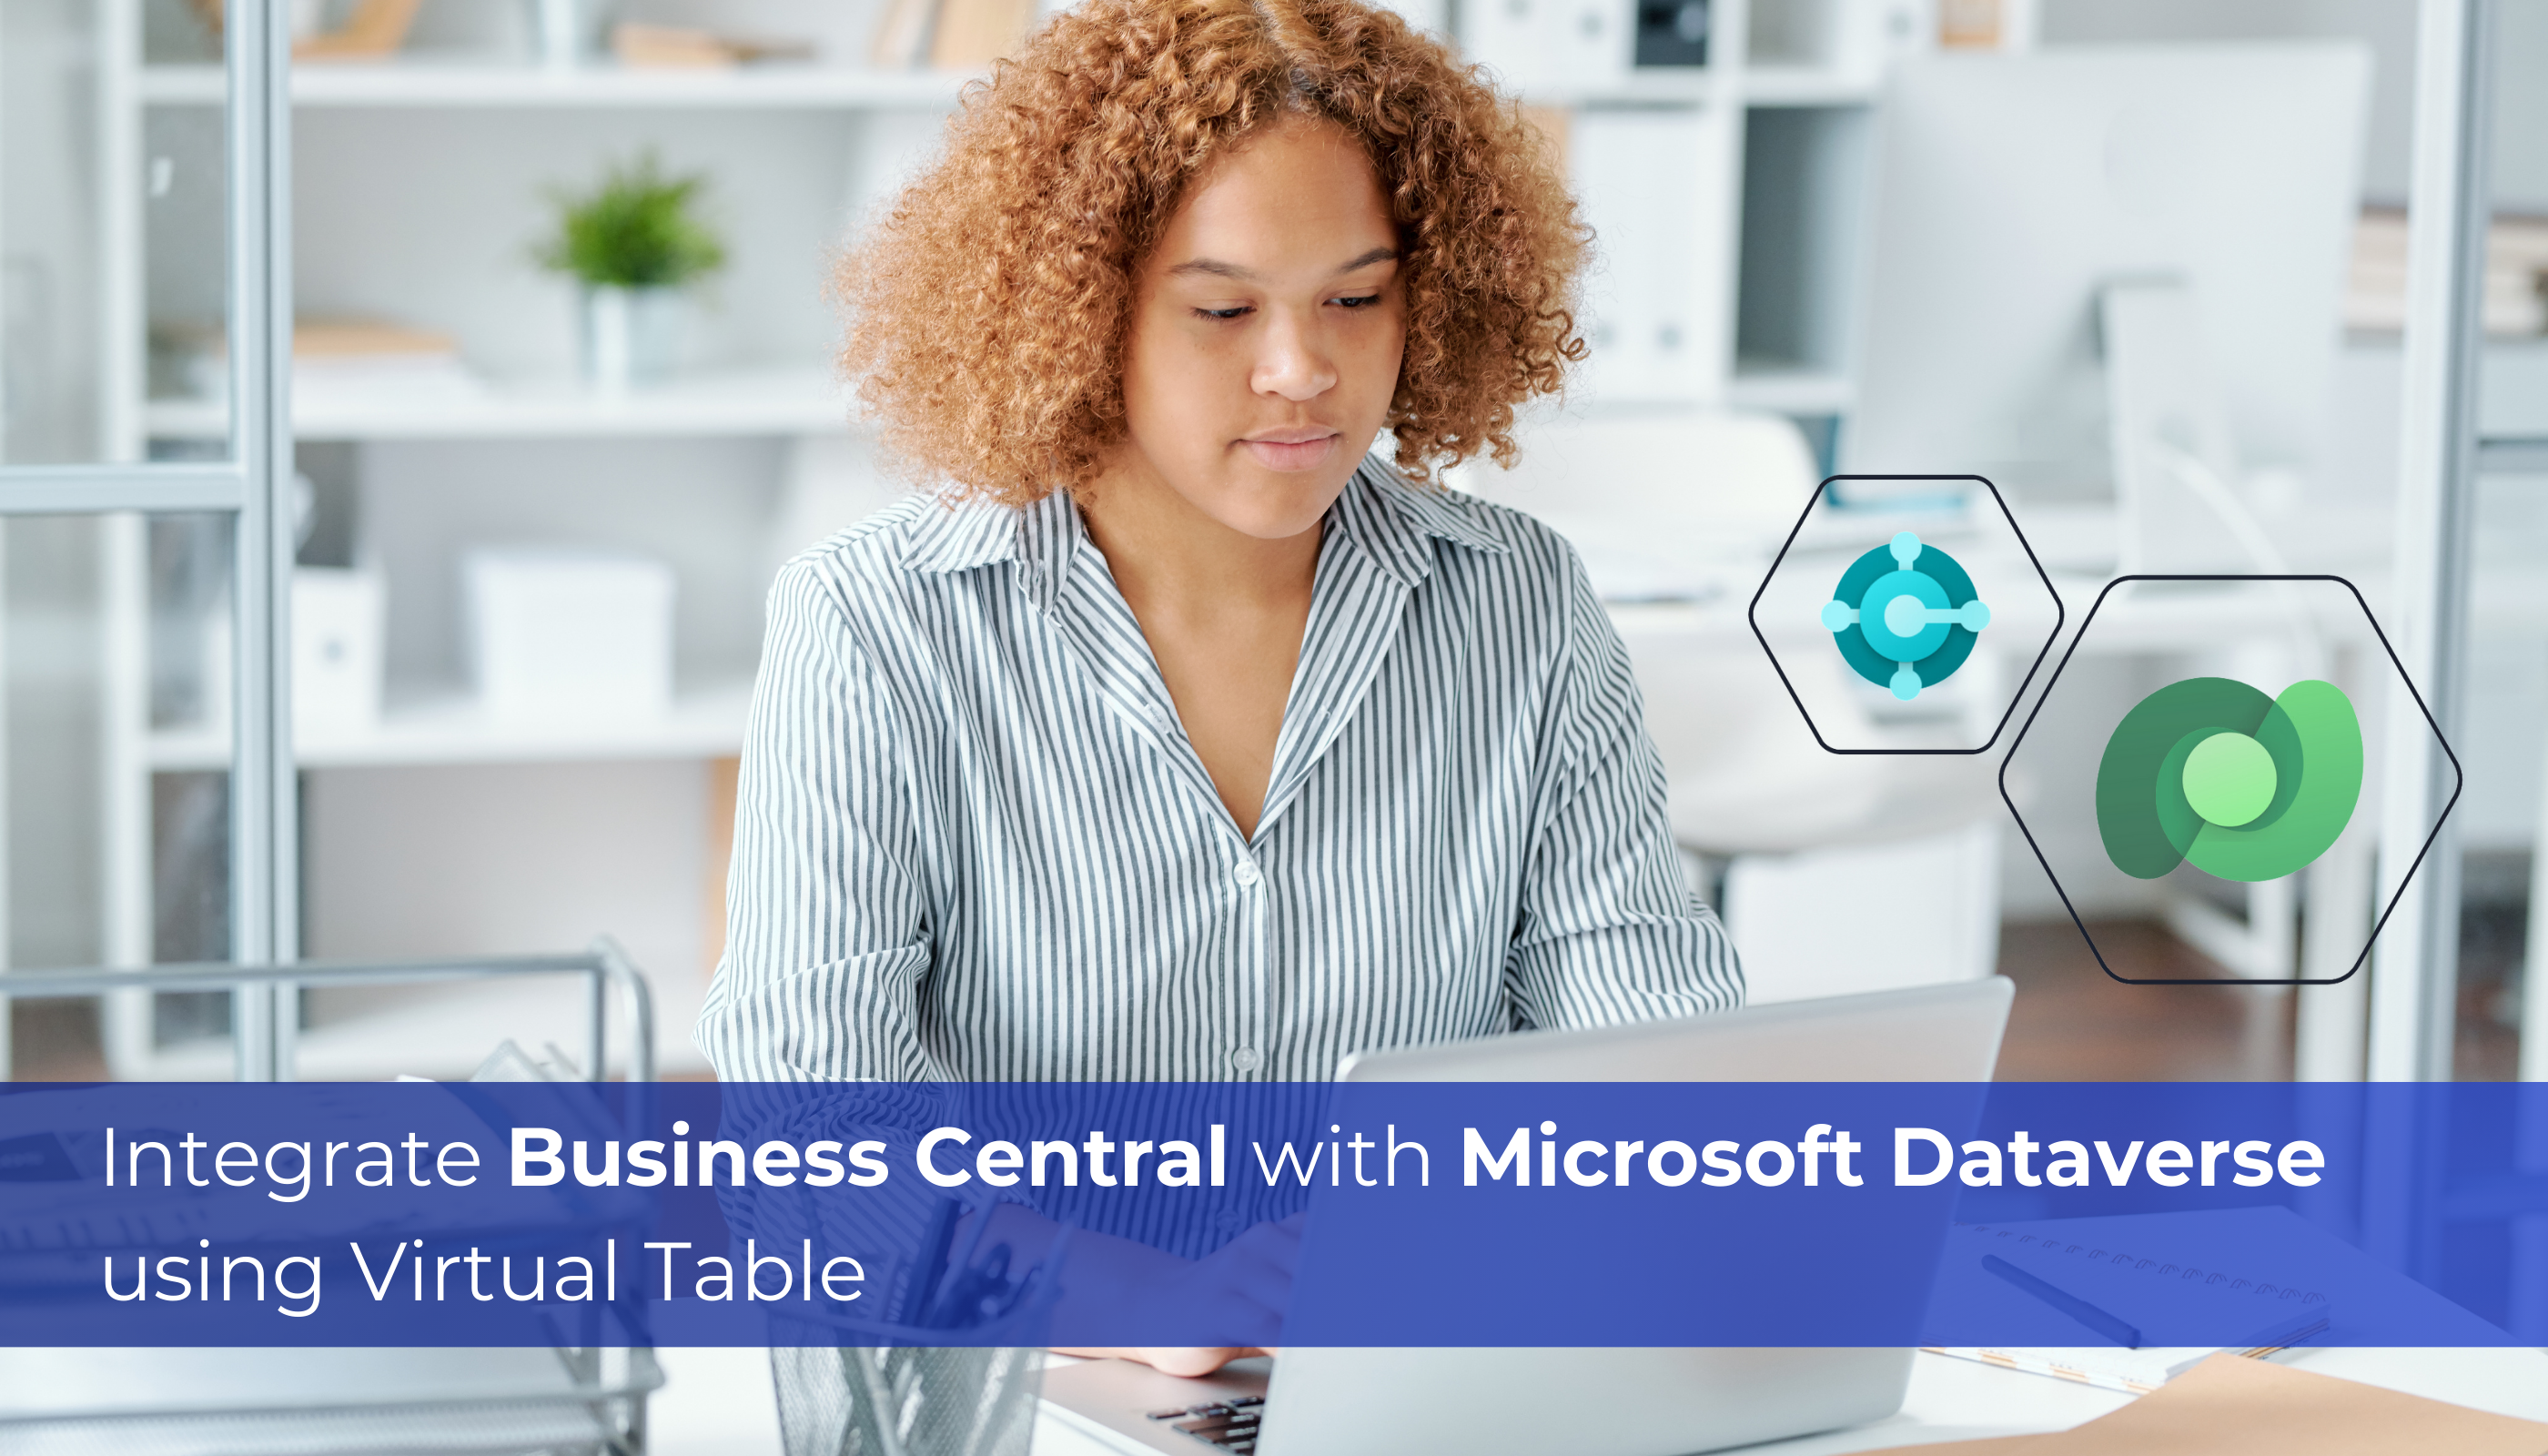 Integrate Business Central with Microsoft Dataverse using Virtual Table